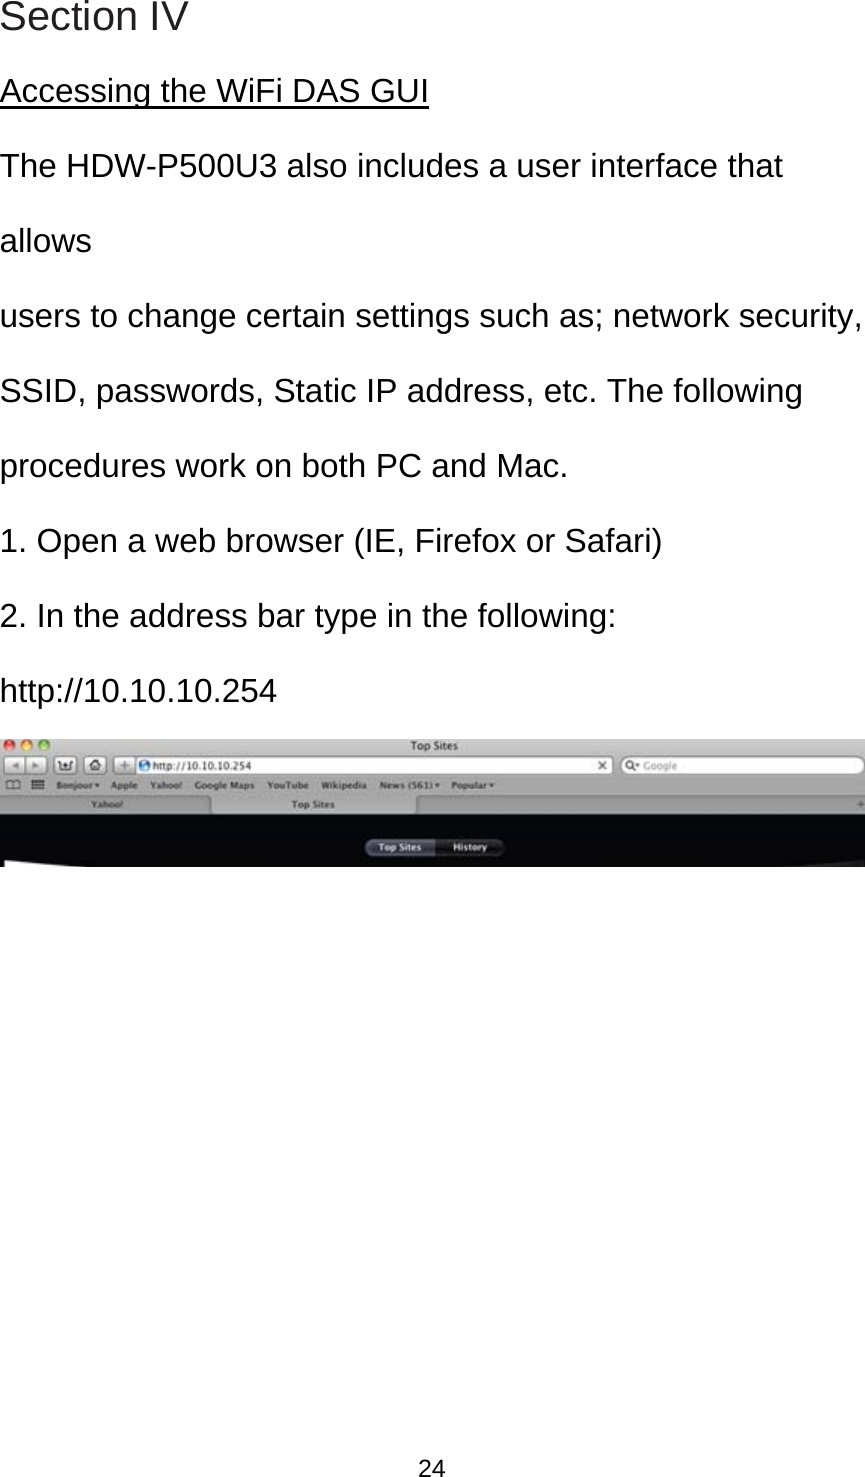 Section IV Accessing the WiFi DAS GUI The HDW-P500U3 also includes a user interface that allows users to change certain settings such as; network security, SSID, passwords, Static IP address, etc. The following procedures work on both PC and Mac. 1. Open a web browser (IE, Firefox or Safari) 2. In the address bar type in the following: http://10.10.10.254          24